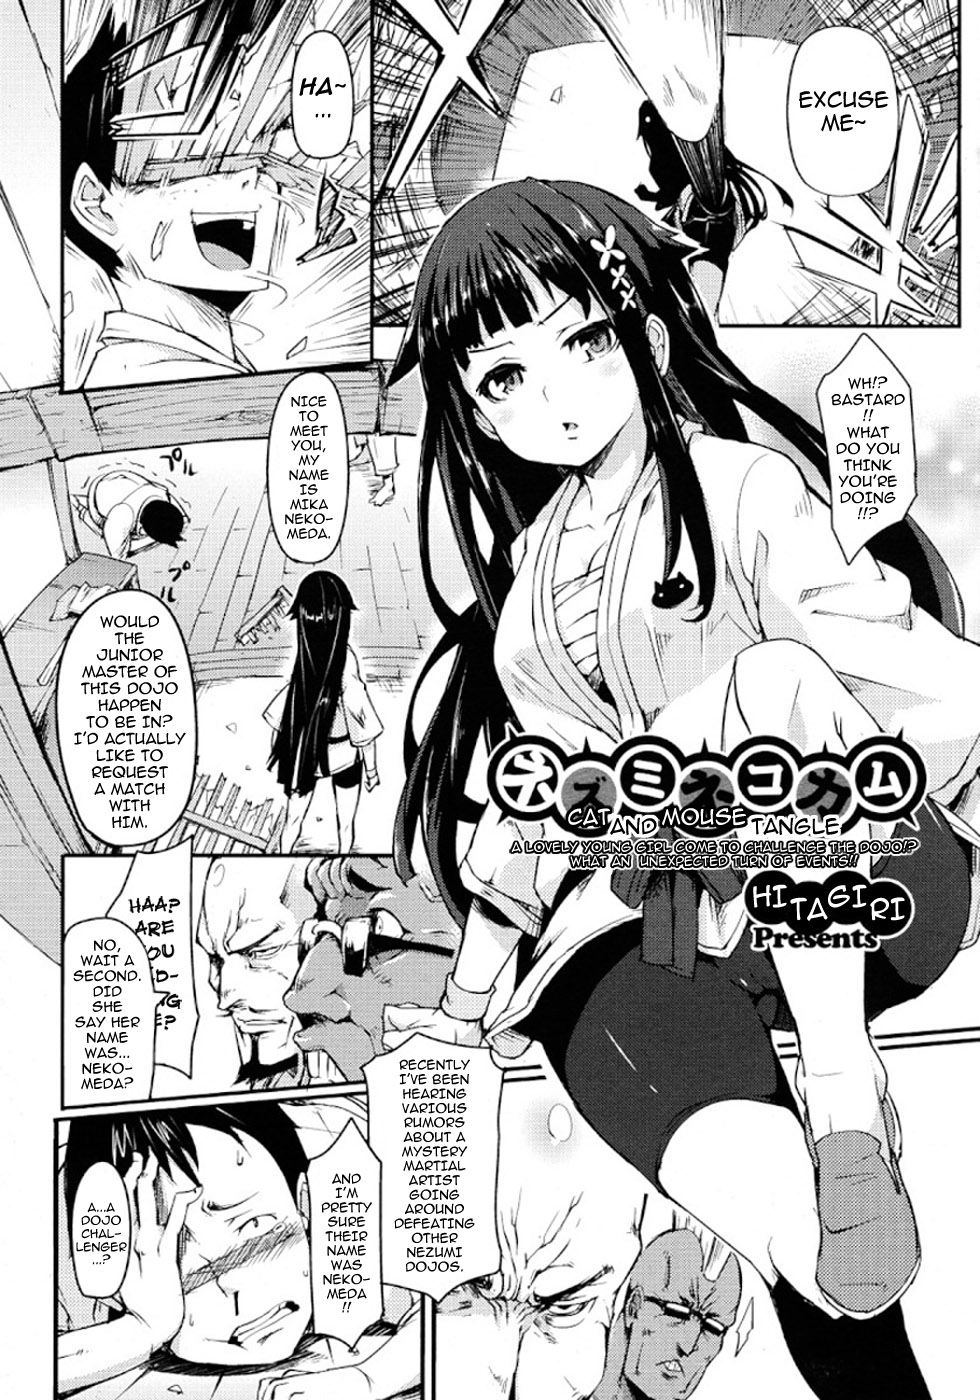 [Hitagiri] Cat and Mouse Tangle Ch 1-2 (Complete) [ENG] [ヒタギリ] ネズミネコカム [英語]